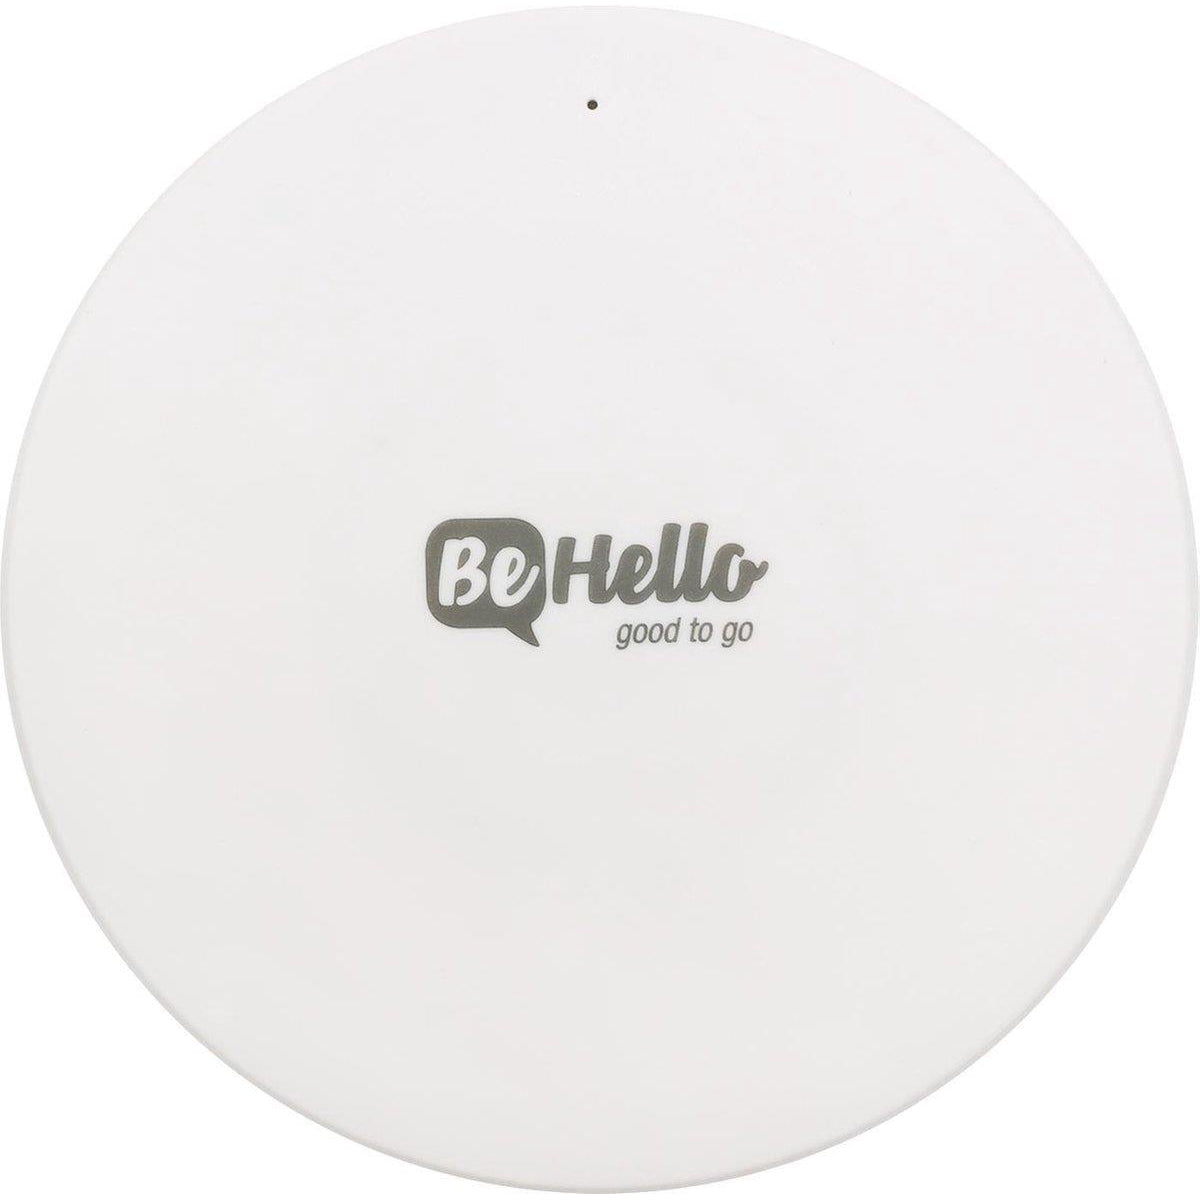 Behello Fast Wireless Charger Charging Pad 5w / 10w, Samsung, Apple - White